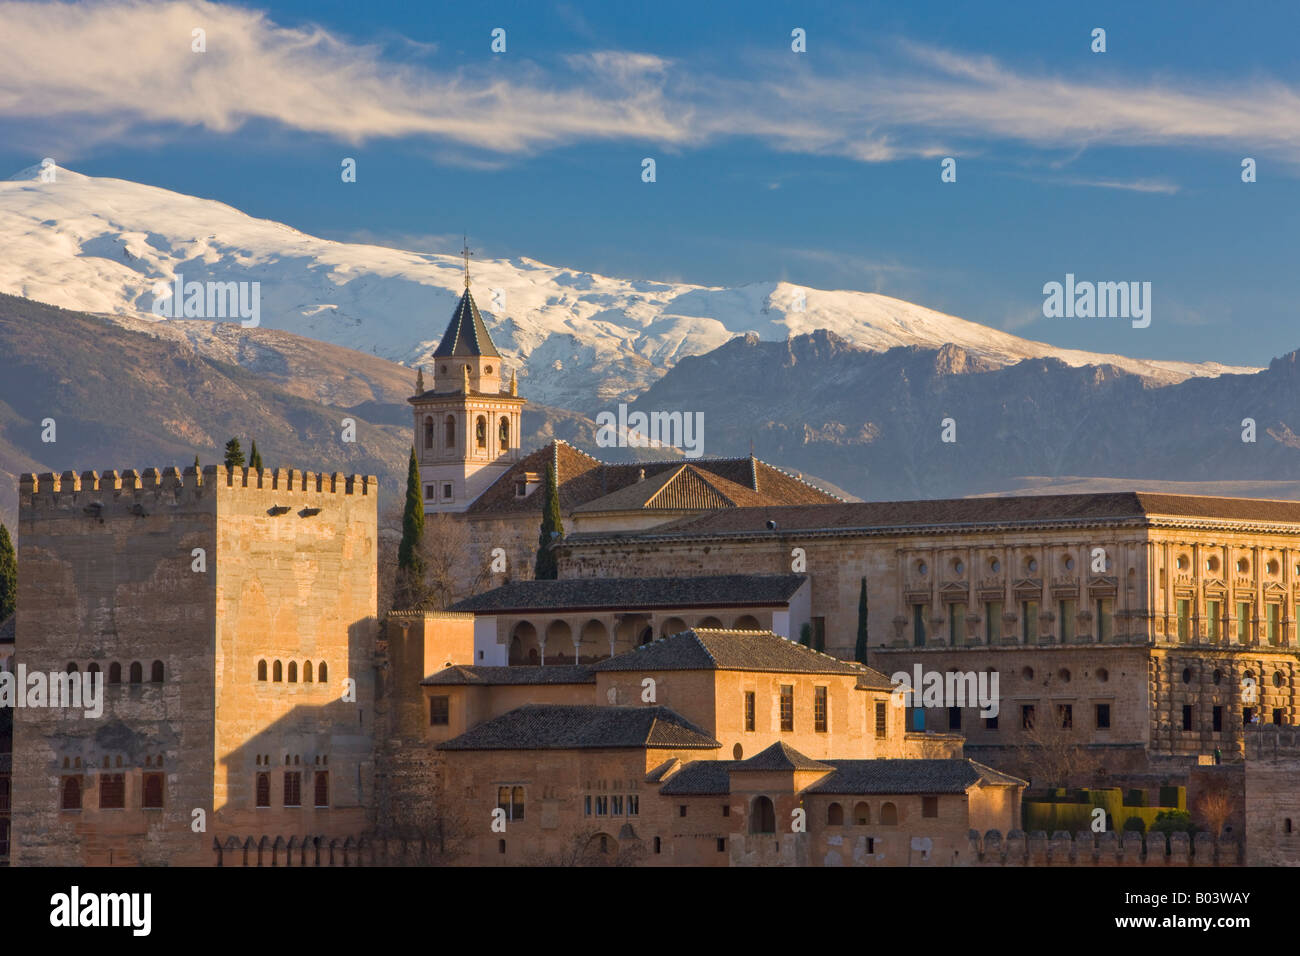 The Alhambra (La Alhambra) - a UNESCO World Heritage Site, backdropped by the Sierra Nevada Mountain Range at sunset Stock Photo